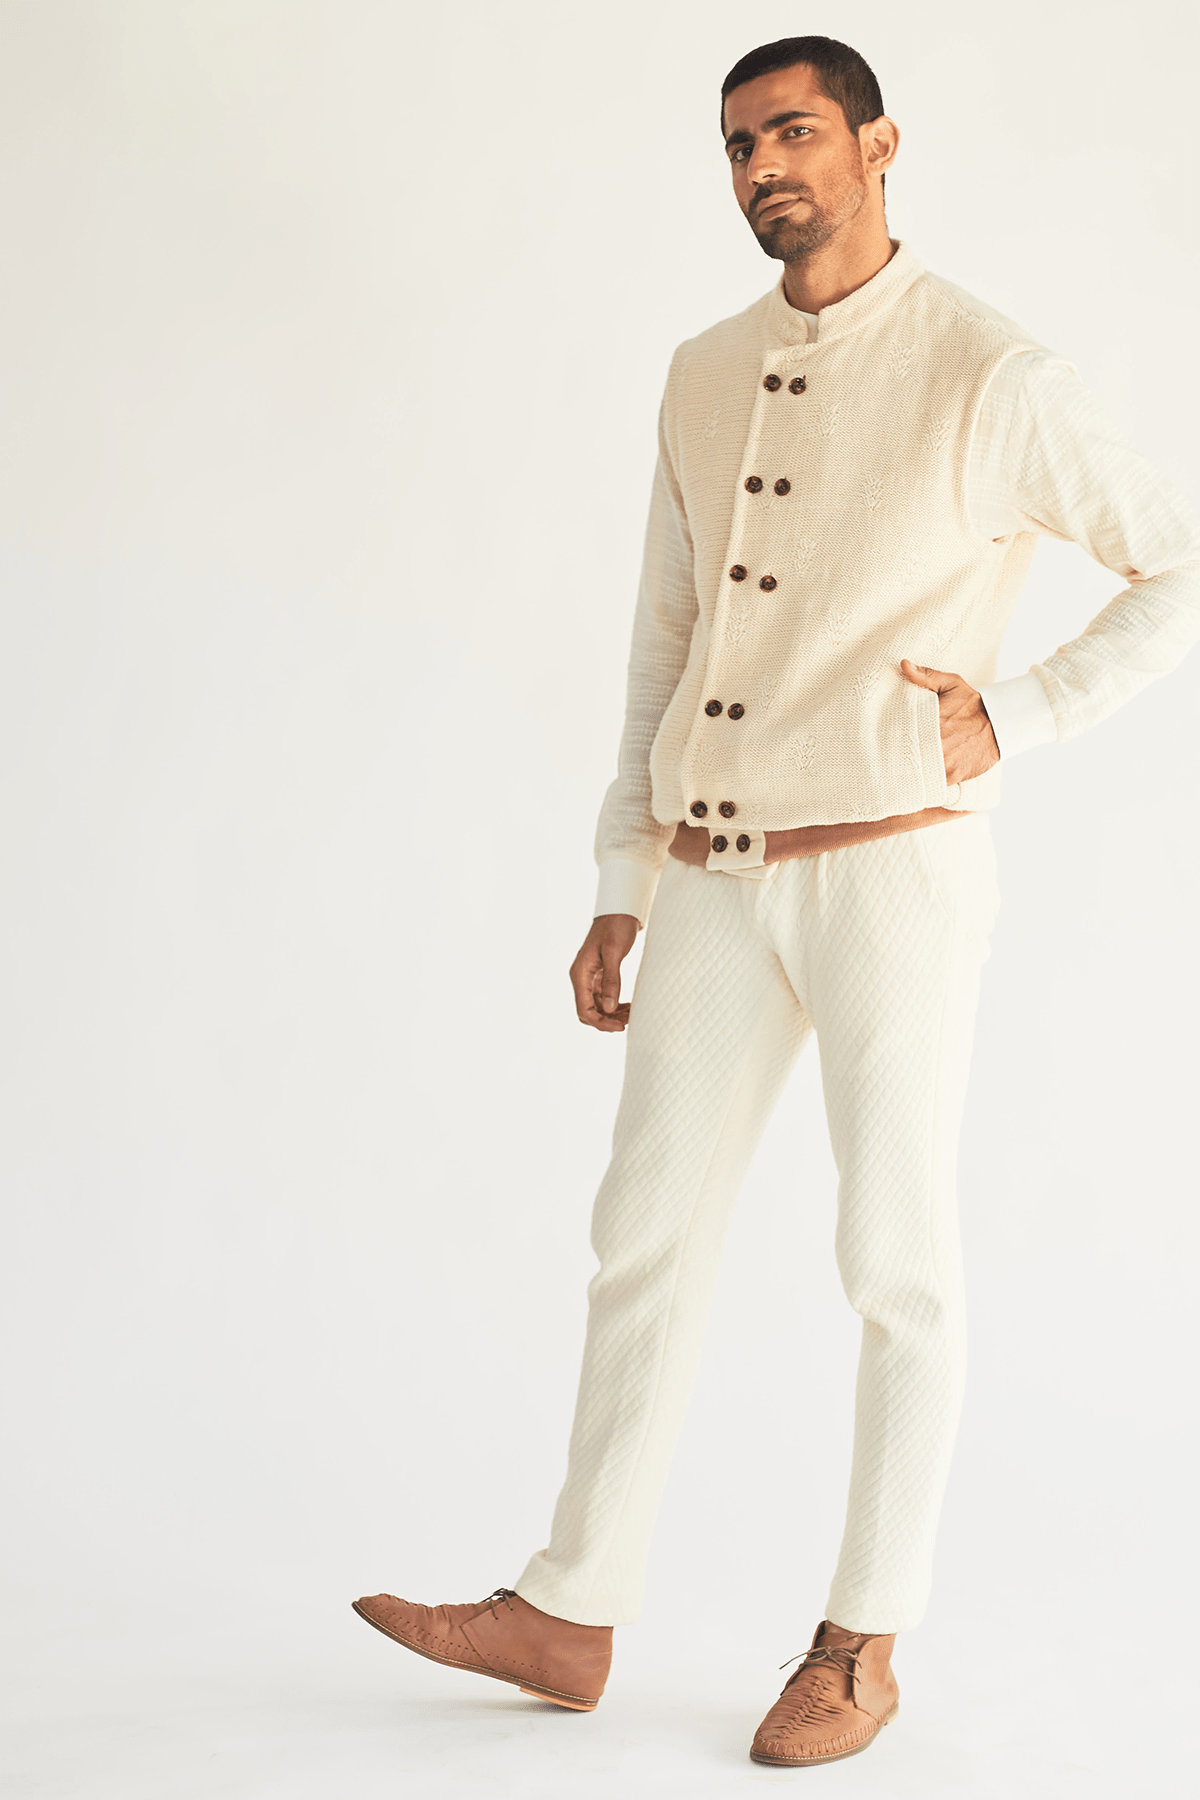 Cotton Bandi Jacket with Pullover and Pants - Kunal Anil Tanna